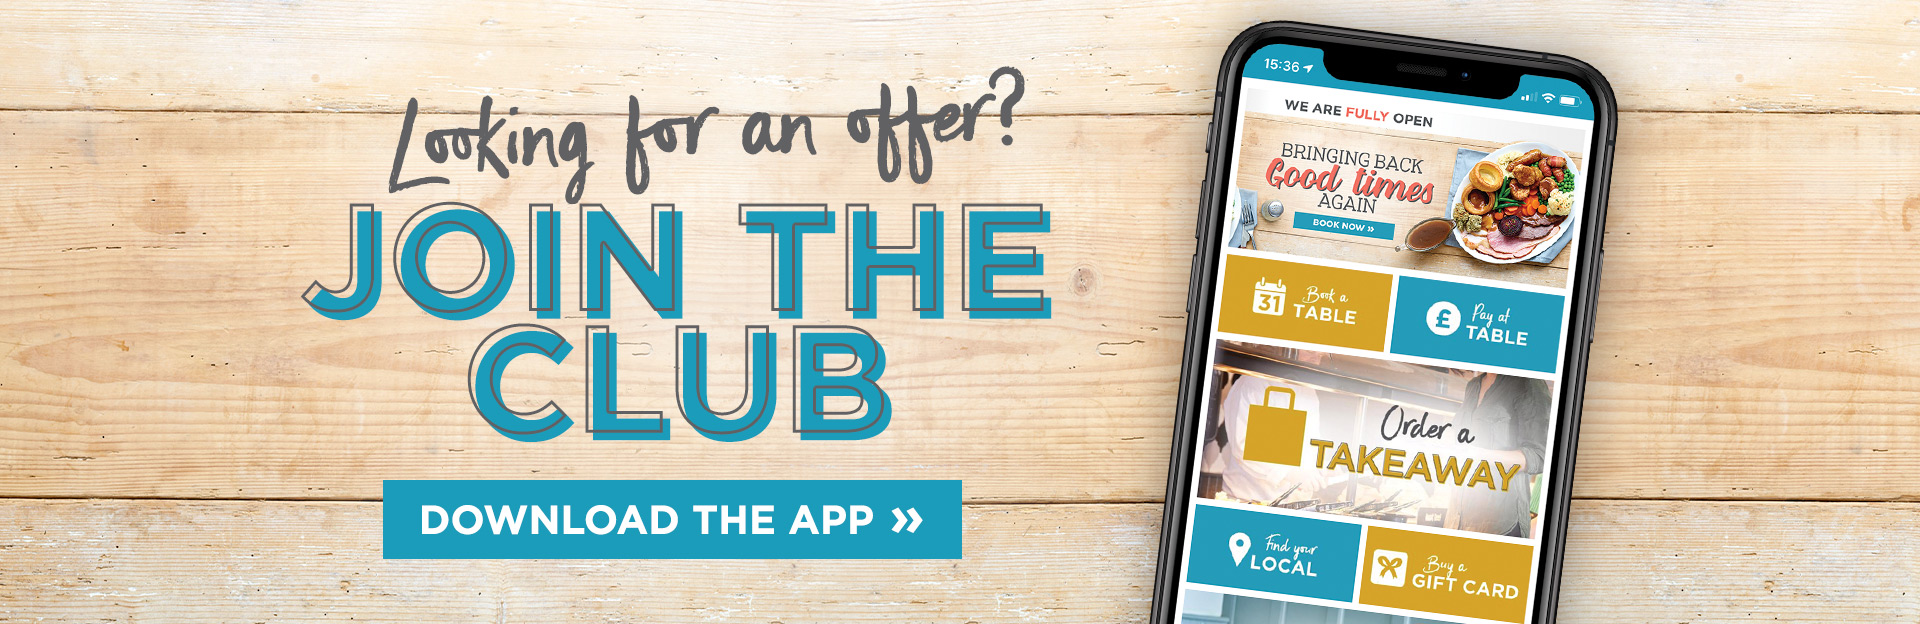 stonehouse-app-jointheclub-banner.jpg